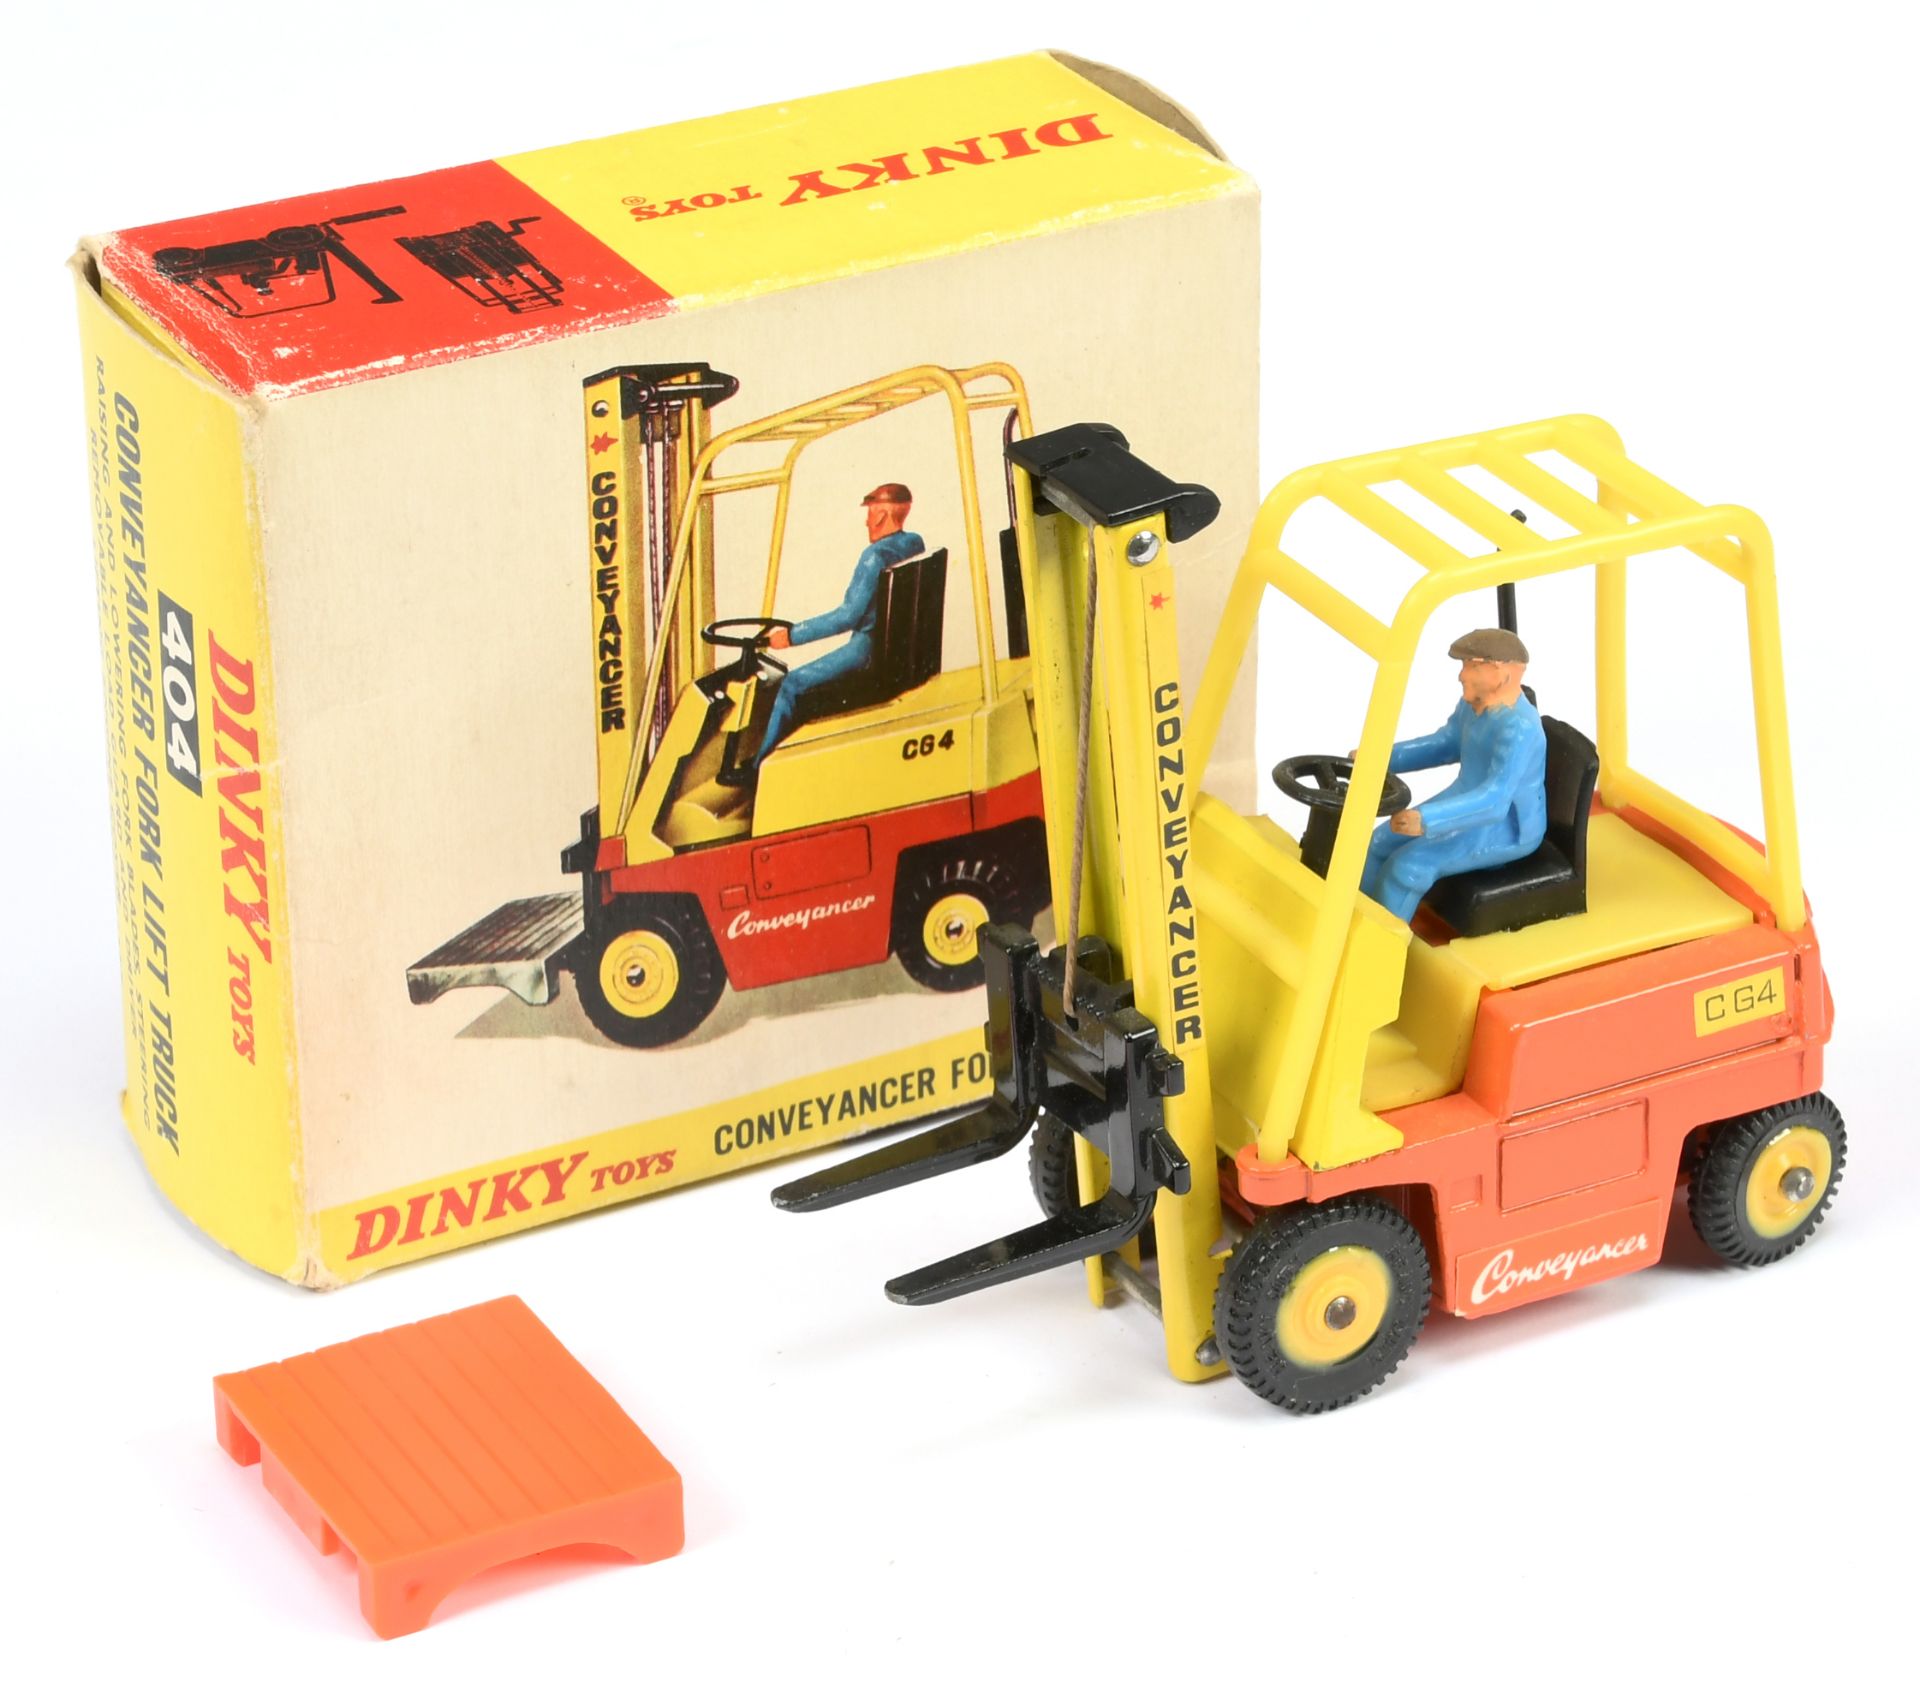 Dinky Toys 404 Conneyancer Fork Lift Truck - Orange body, yellow plastic inner and cage, black fo...